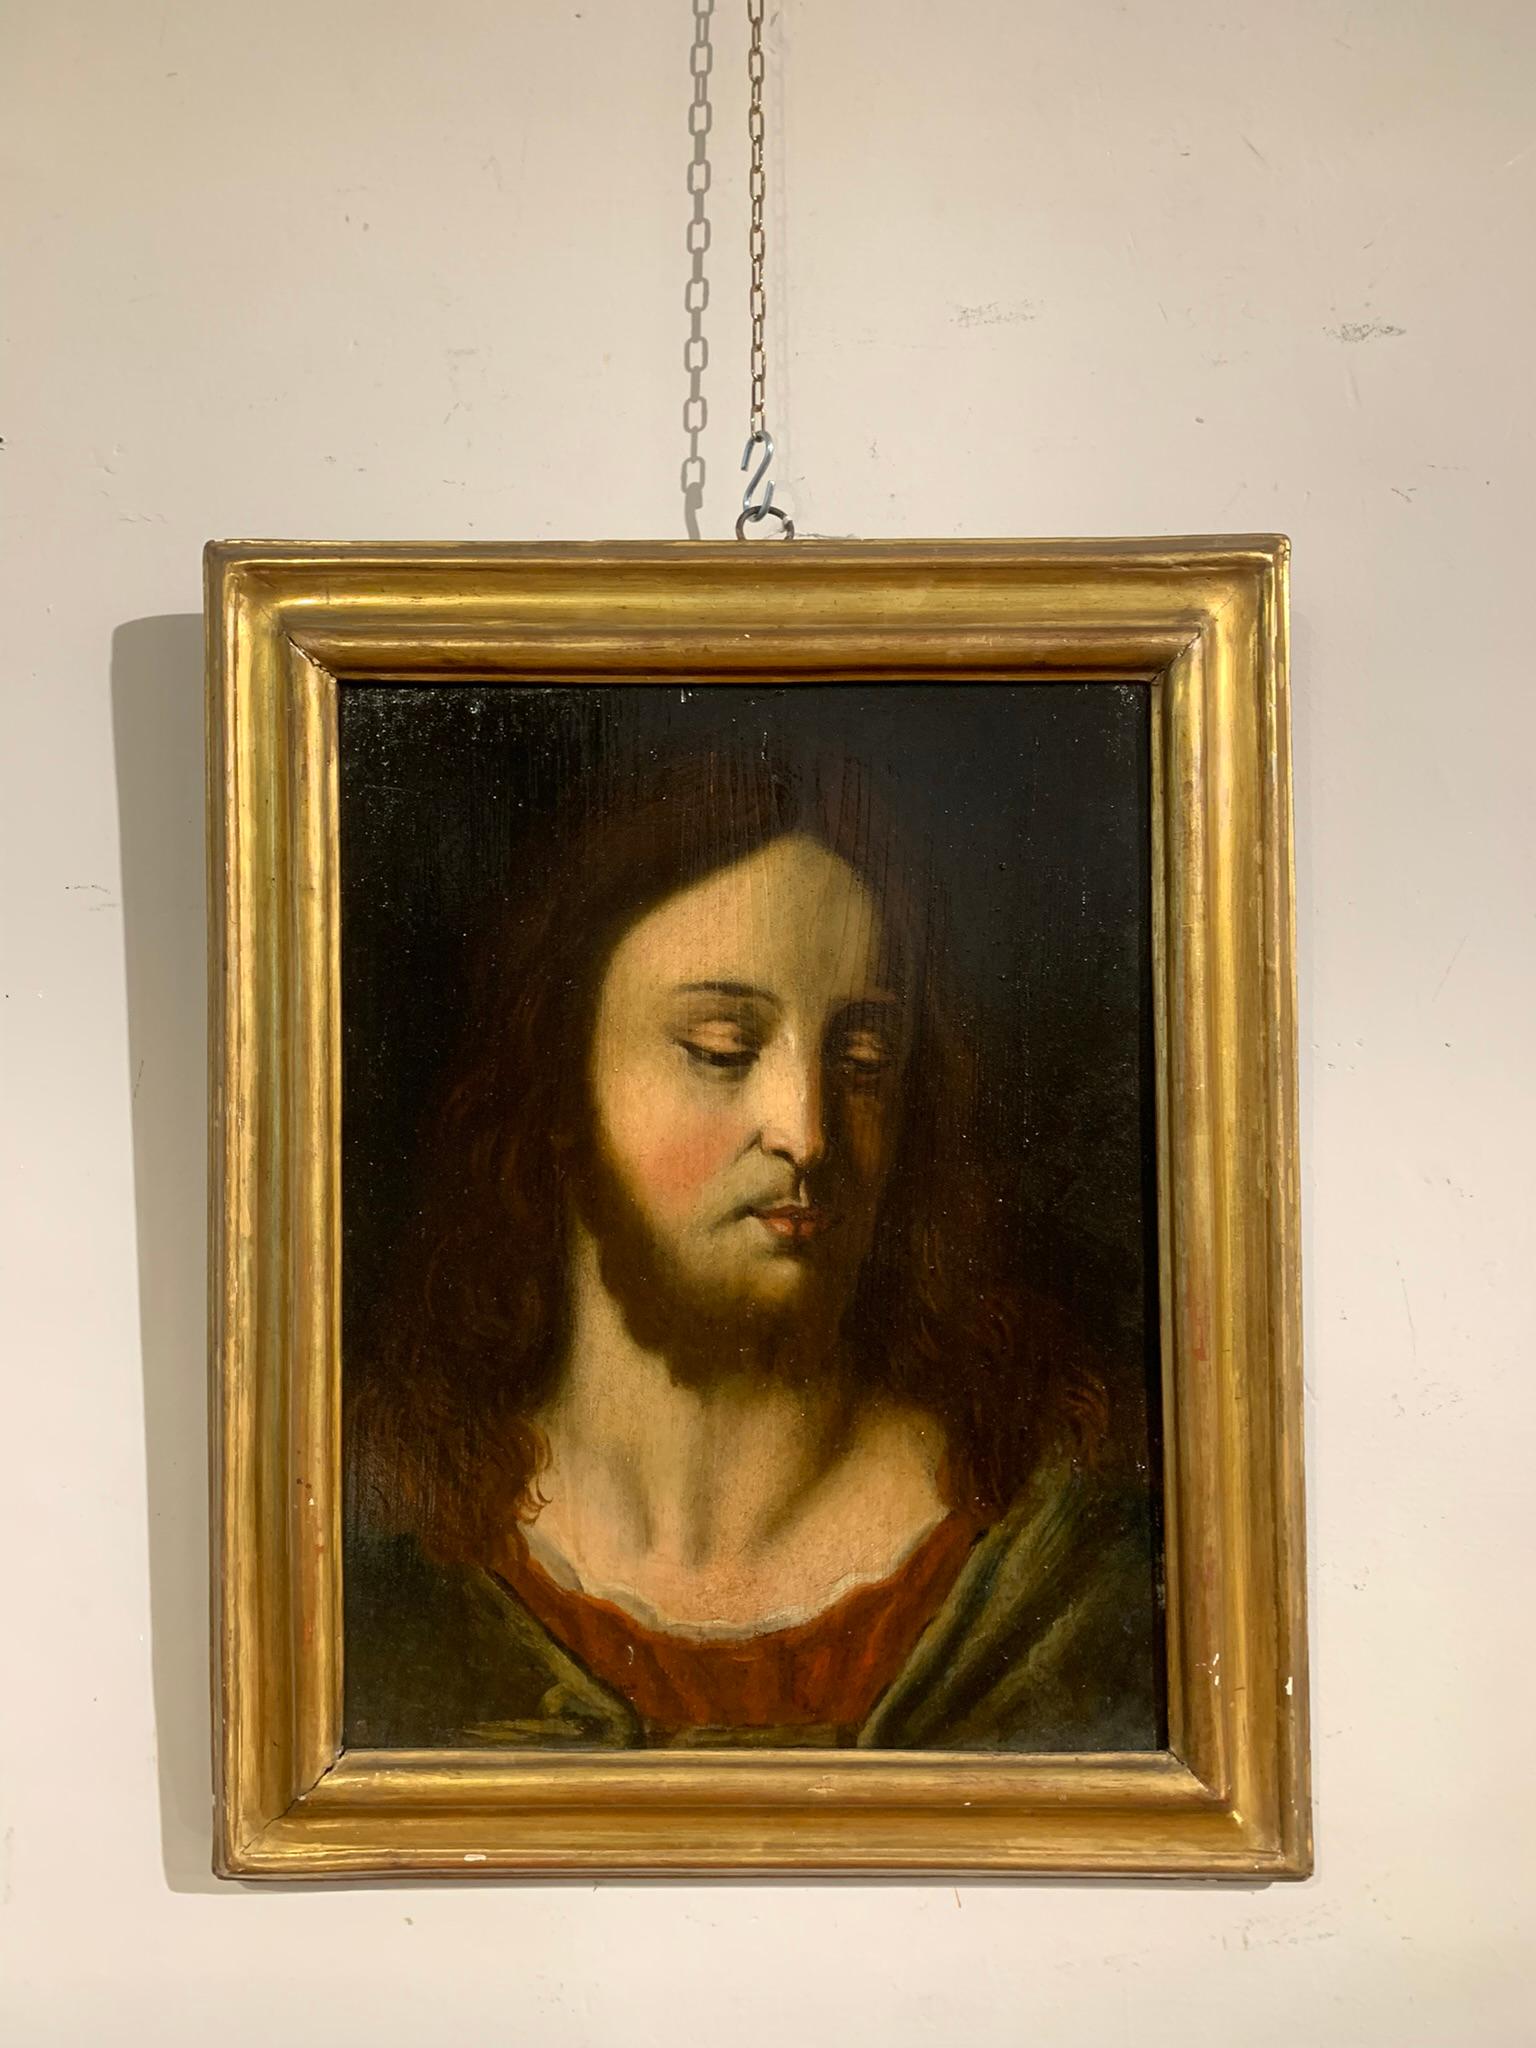 Beautiful painting depicting the face of Christ mocked in front of the people.
Oil technique on spruce tablet, attributable to the Venetian school of the late 1600s and early 1800s.
The frame is in carved and gilded wood.

Work measures 33.5x43